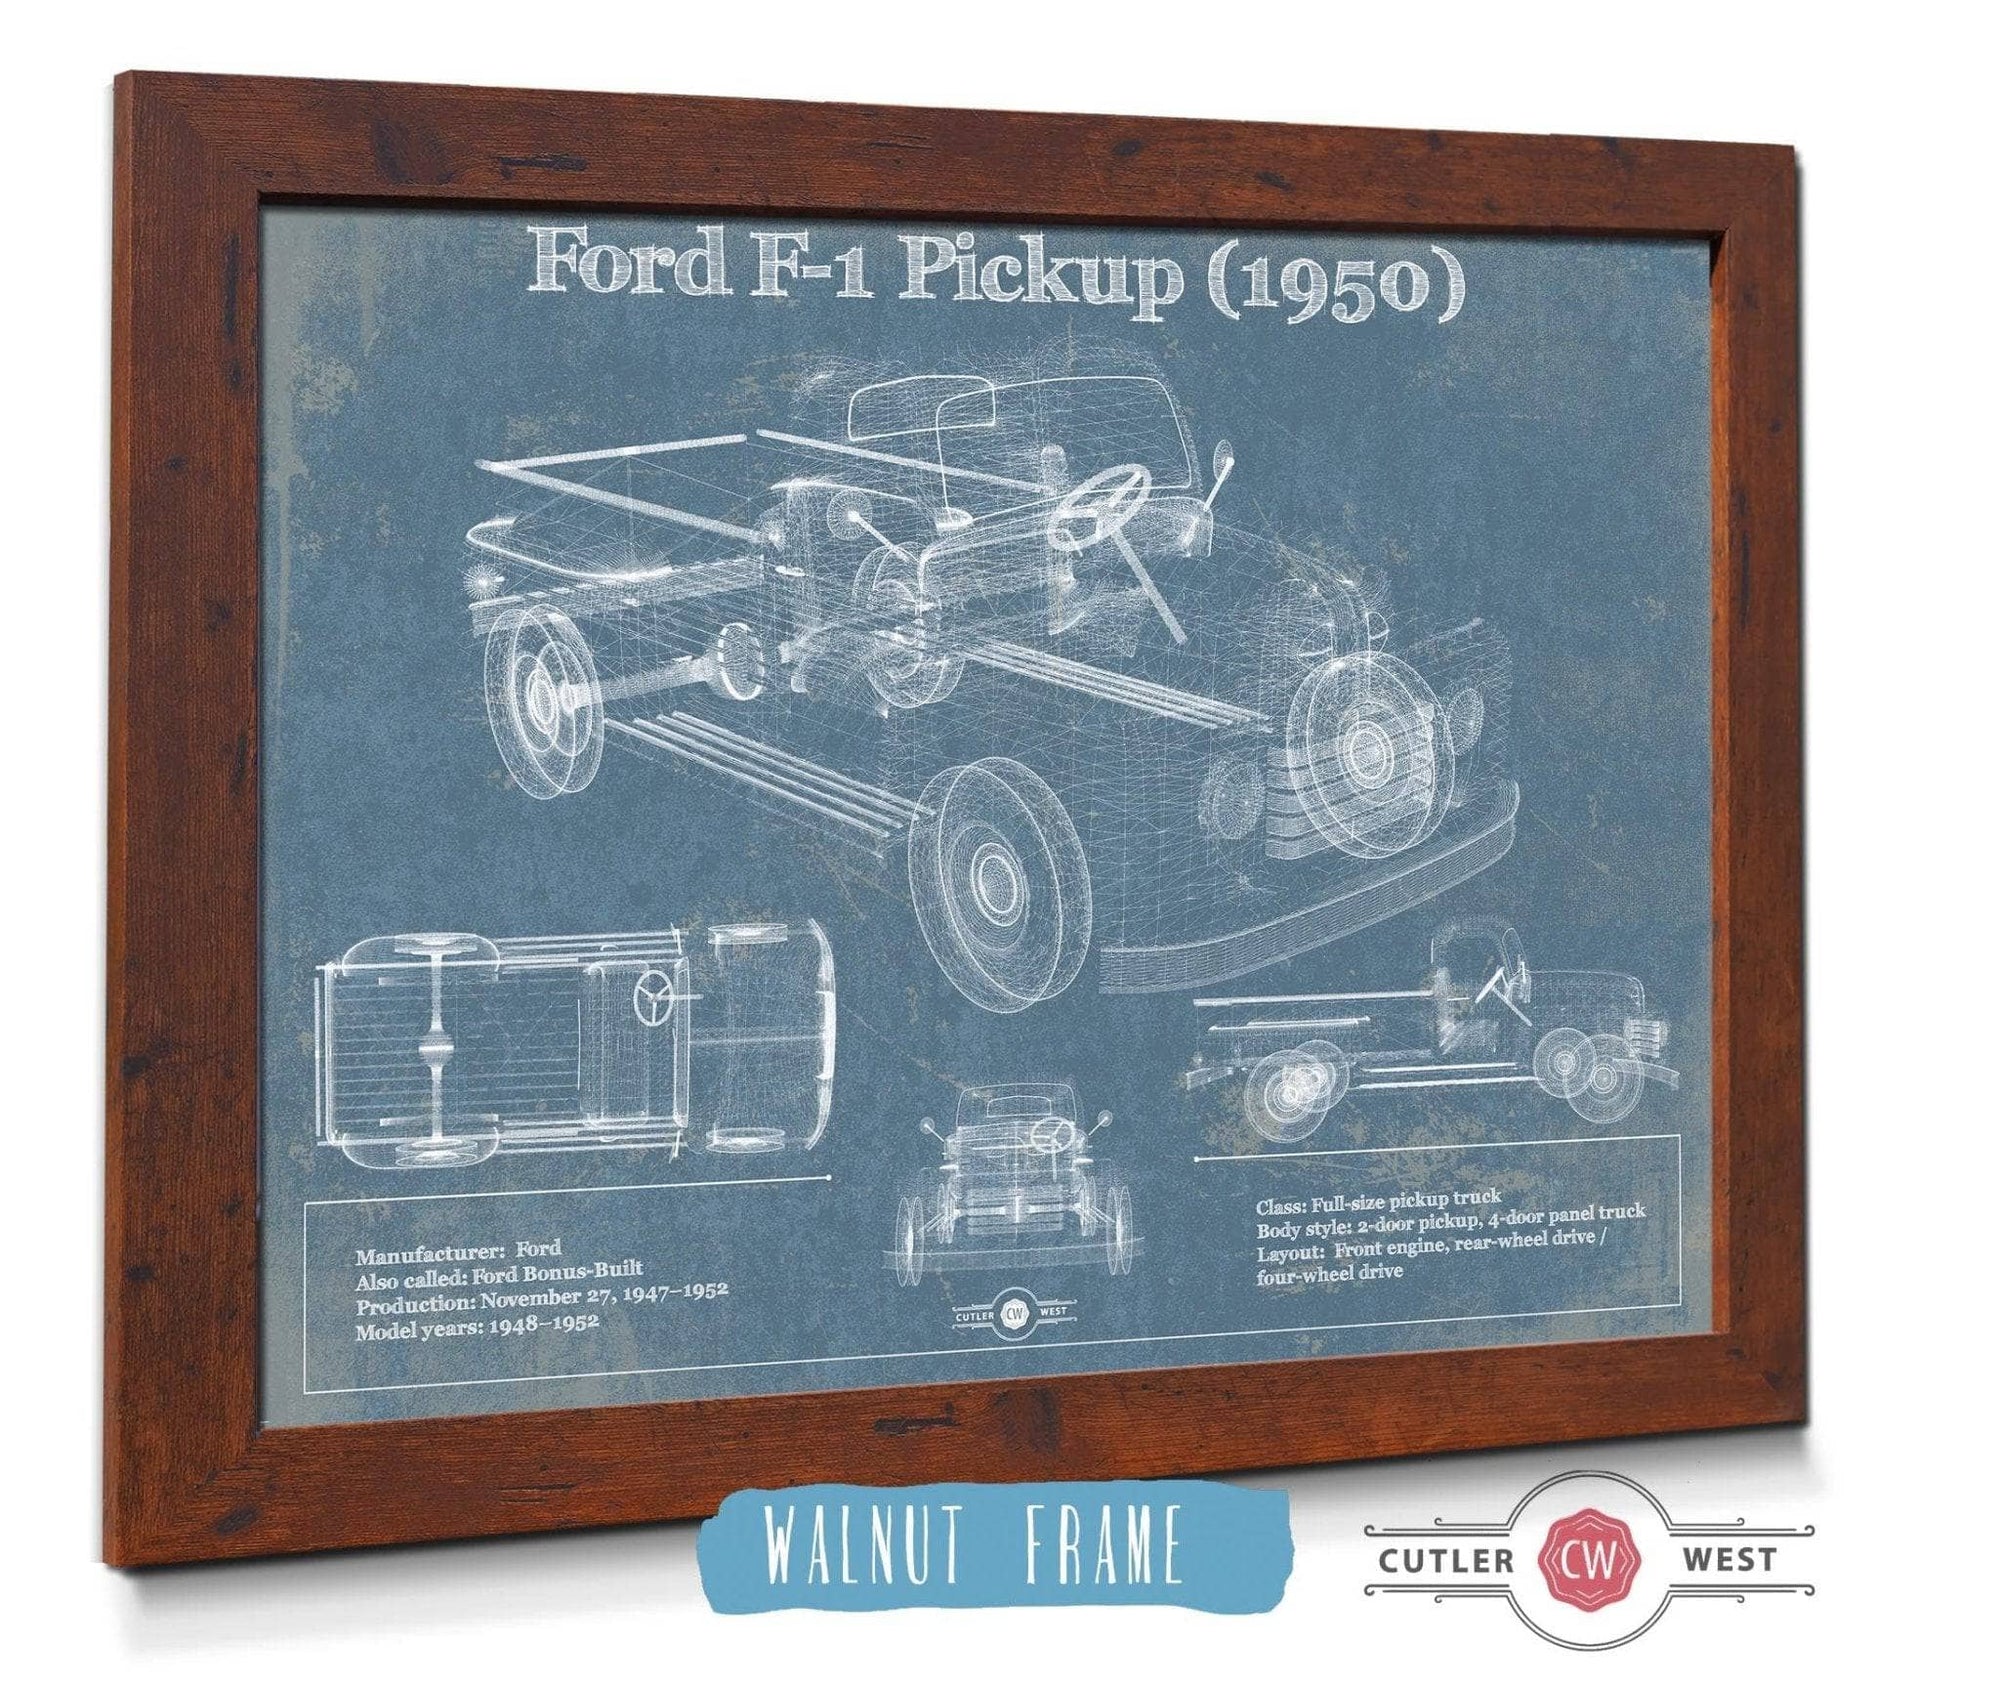 Cutler West Ford Collection 14" x 11" / Walnut Frame Ford F-1 Pickup 1950 Vintage Blueprint Truck Print 845000188_55010